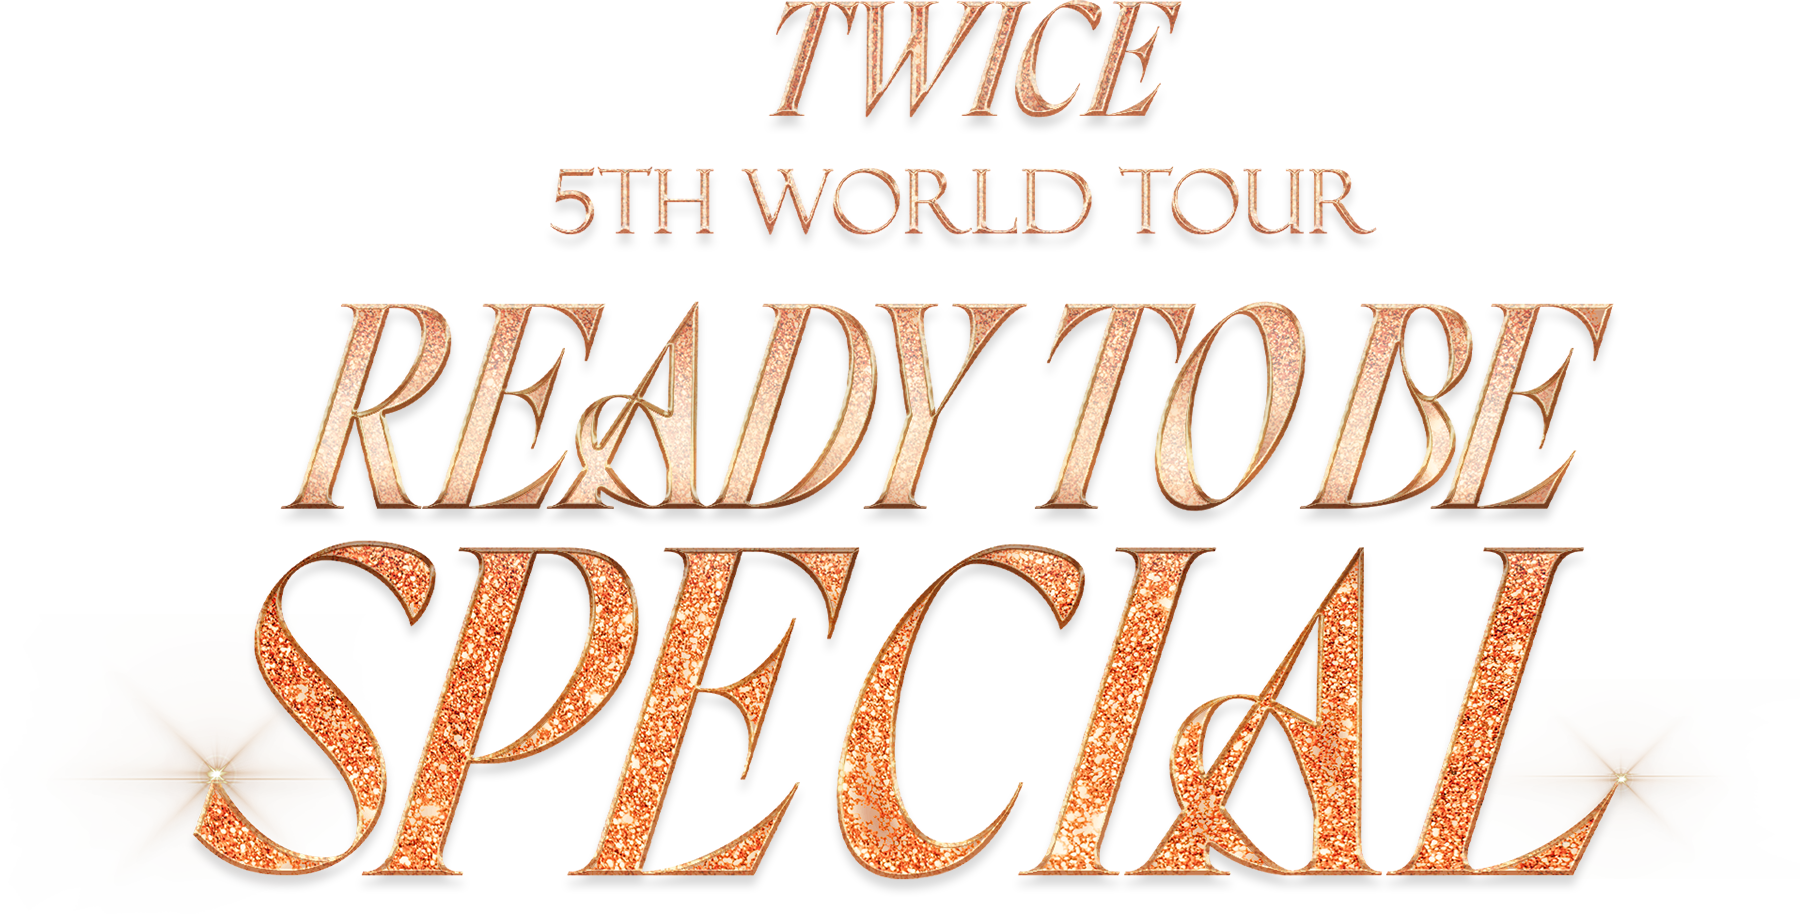 TWICE 5TH WORLD TOUR READY TO BE SPECIAL